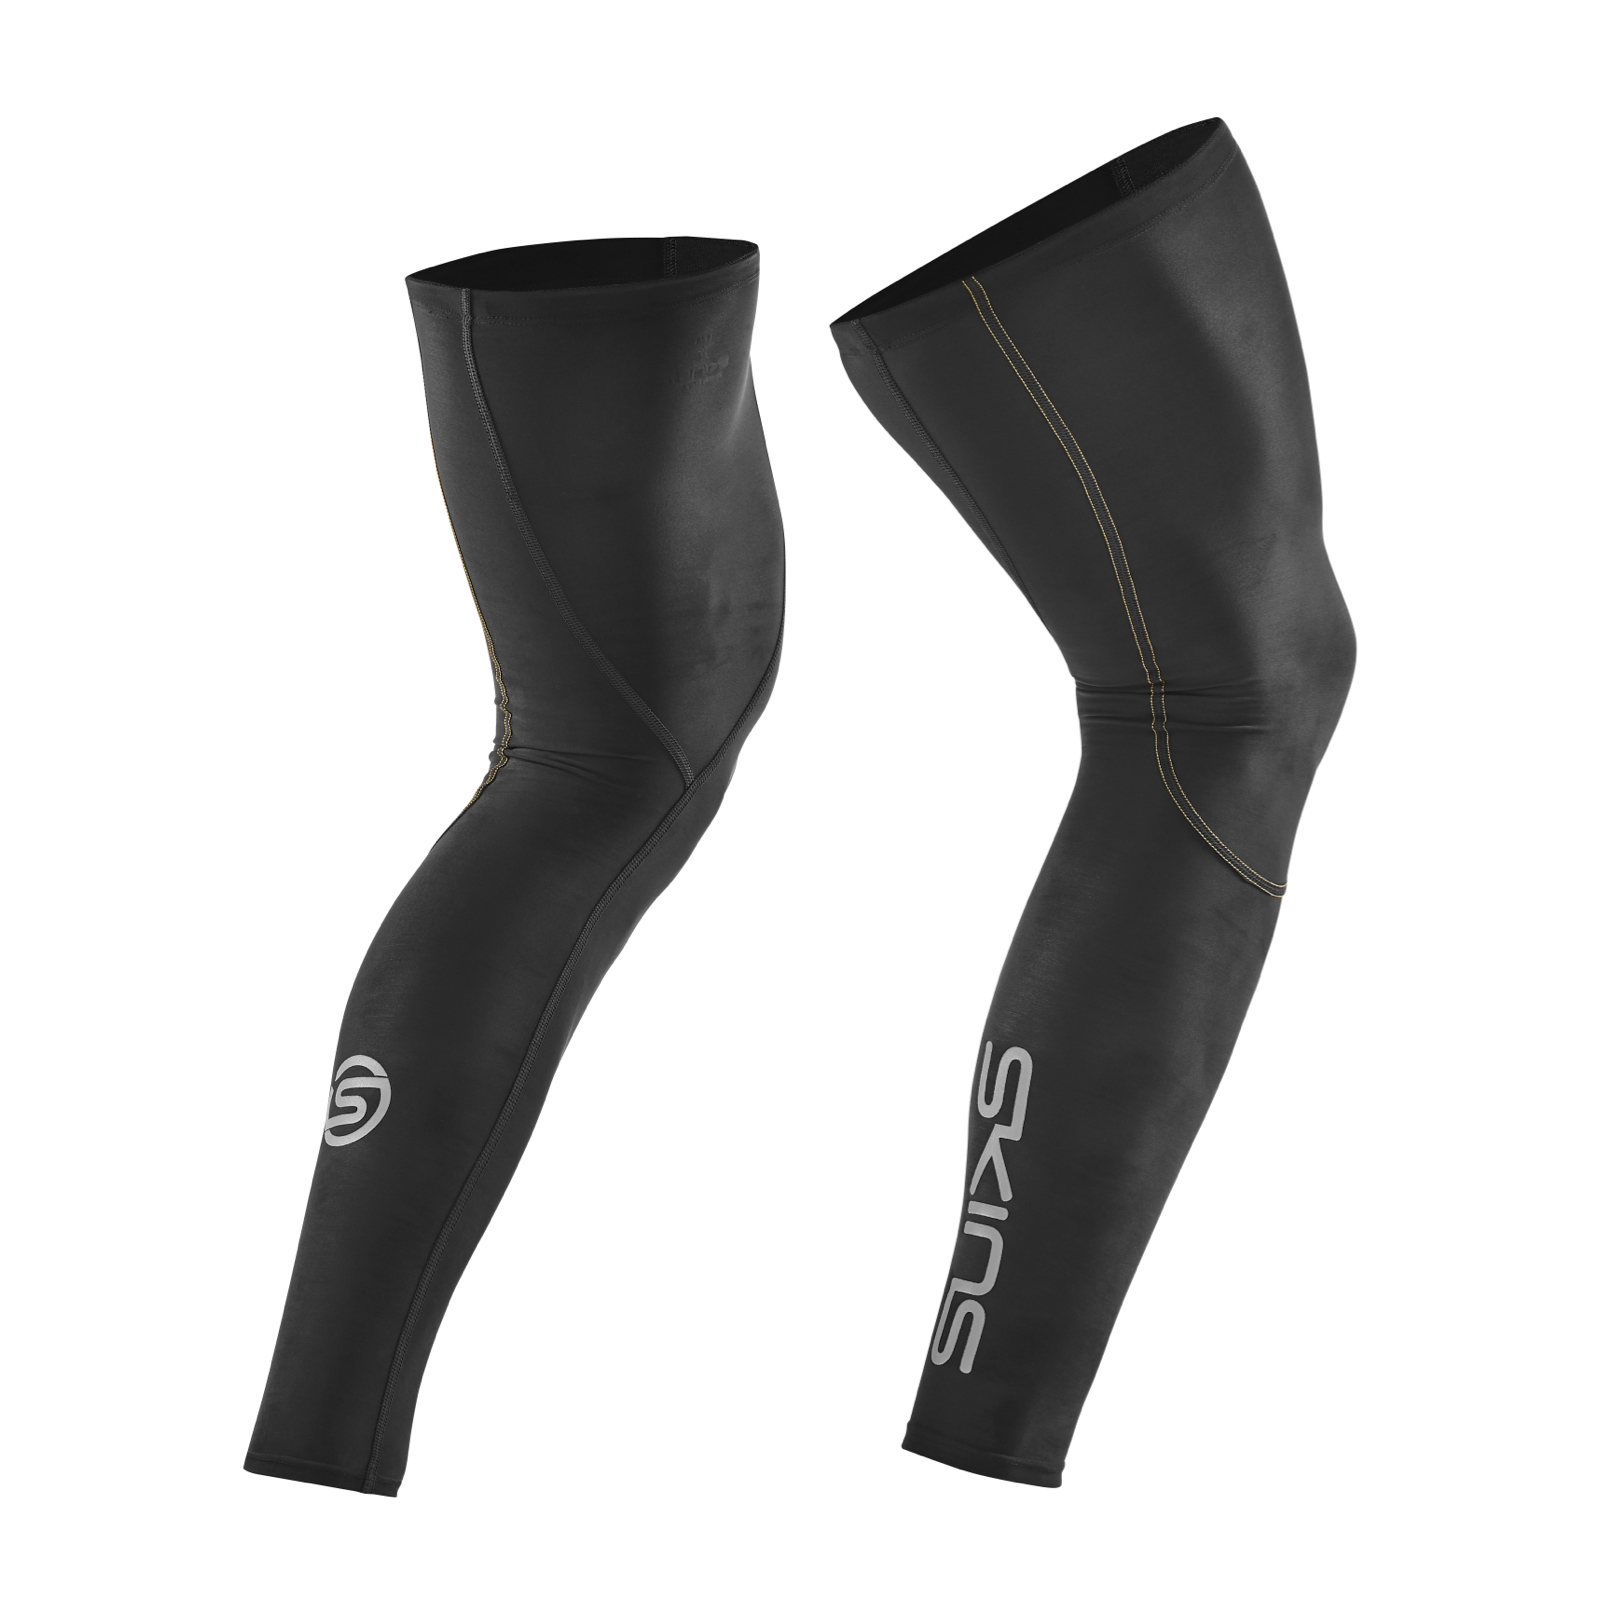 SKINS Series 3 MX Compression Calf Sleeves {SK-ST00330879